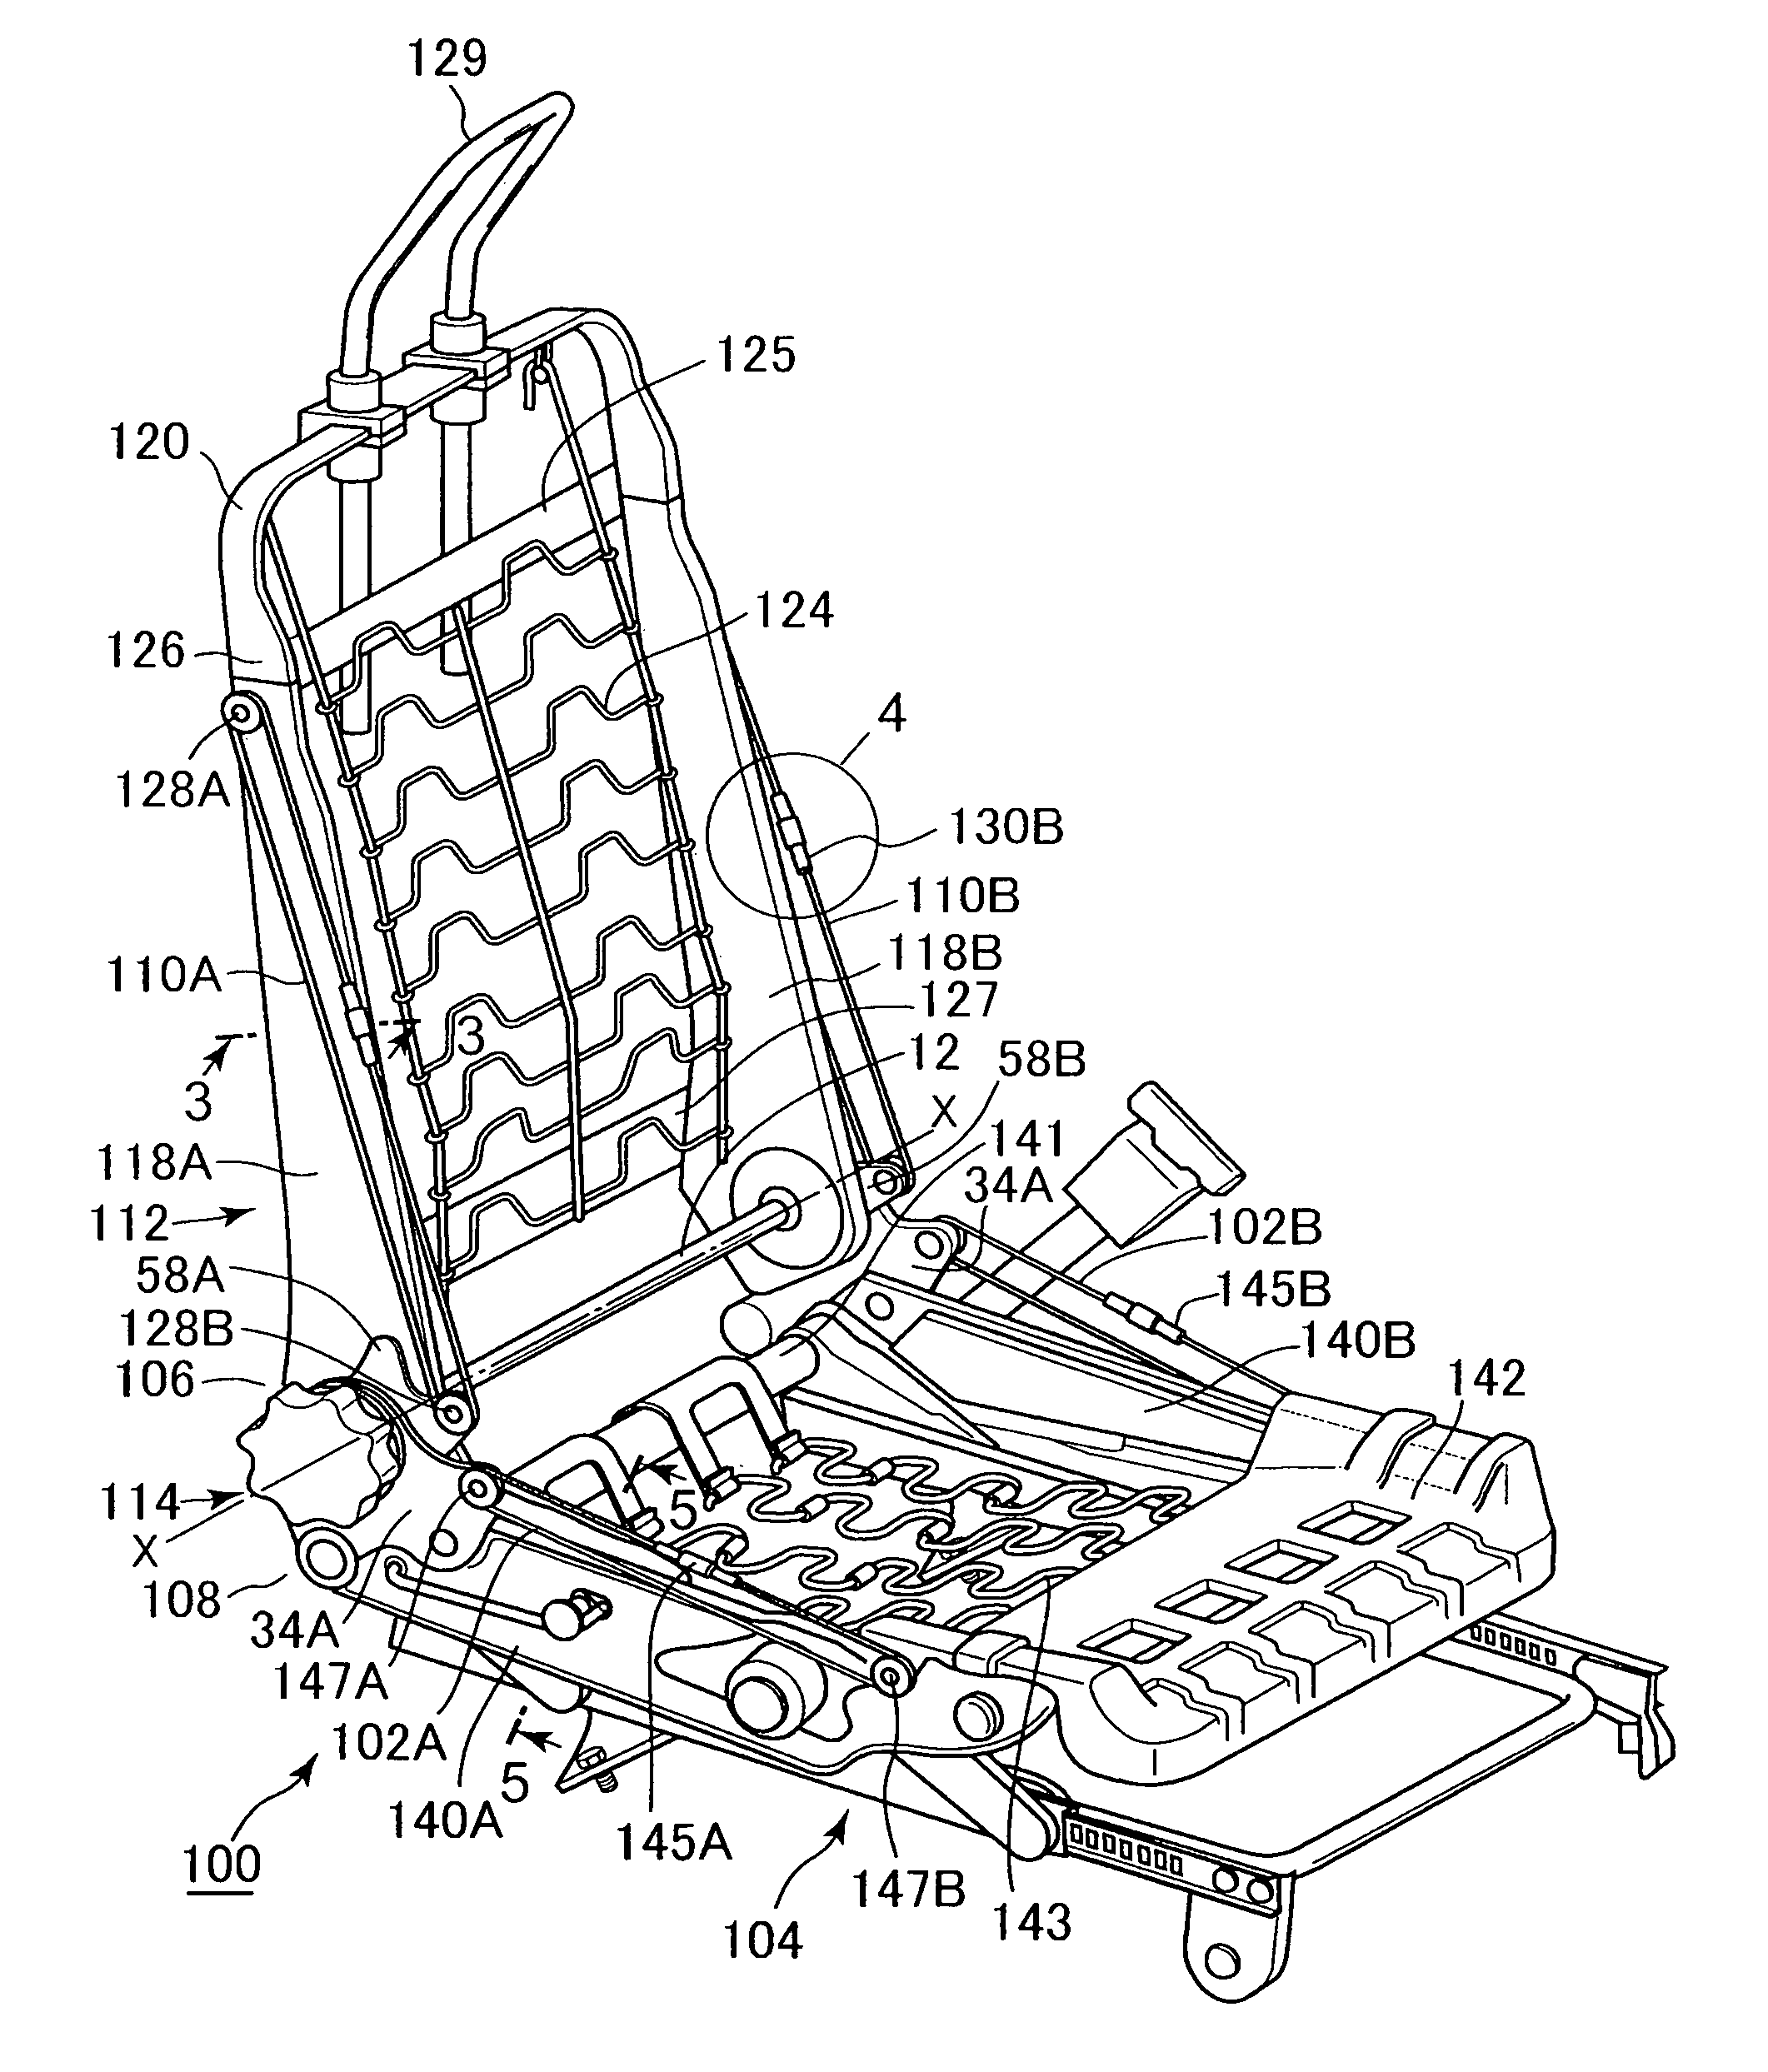 Seat cushion frame structure of seat for vehicle and seat for vehicle with seat cushion frame structure